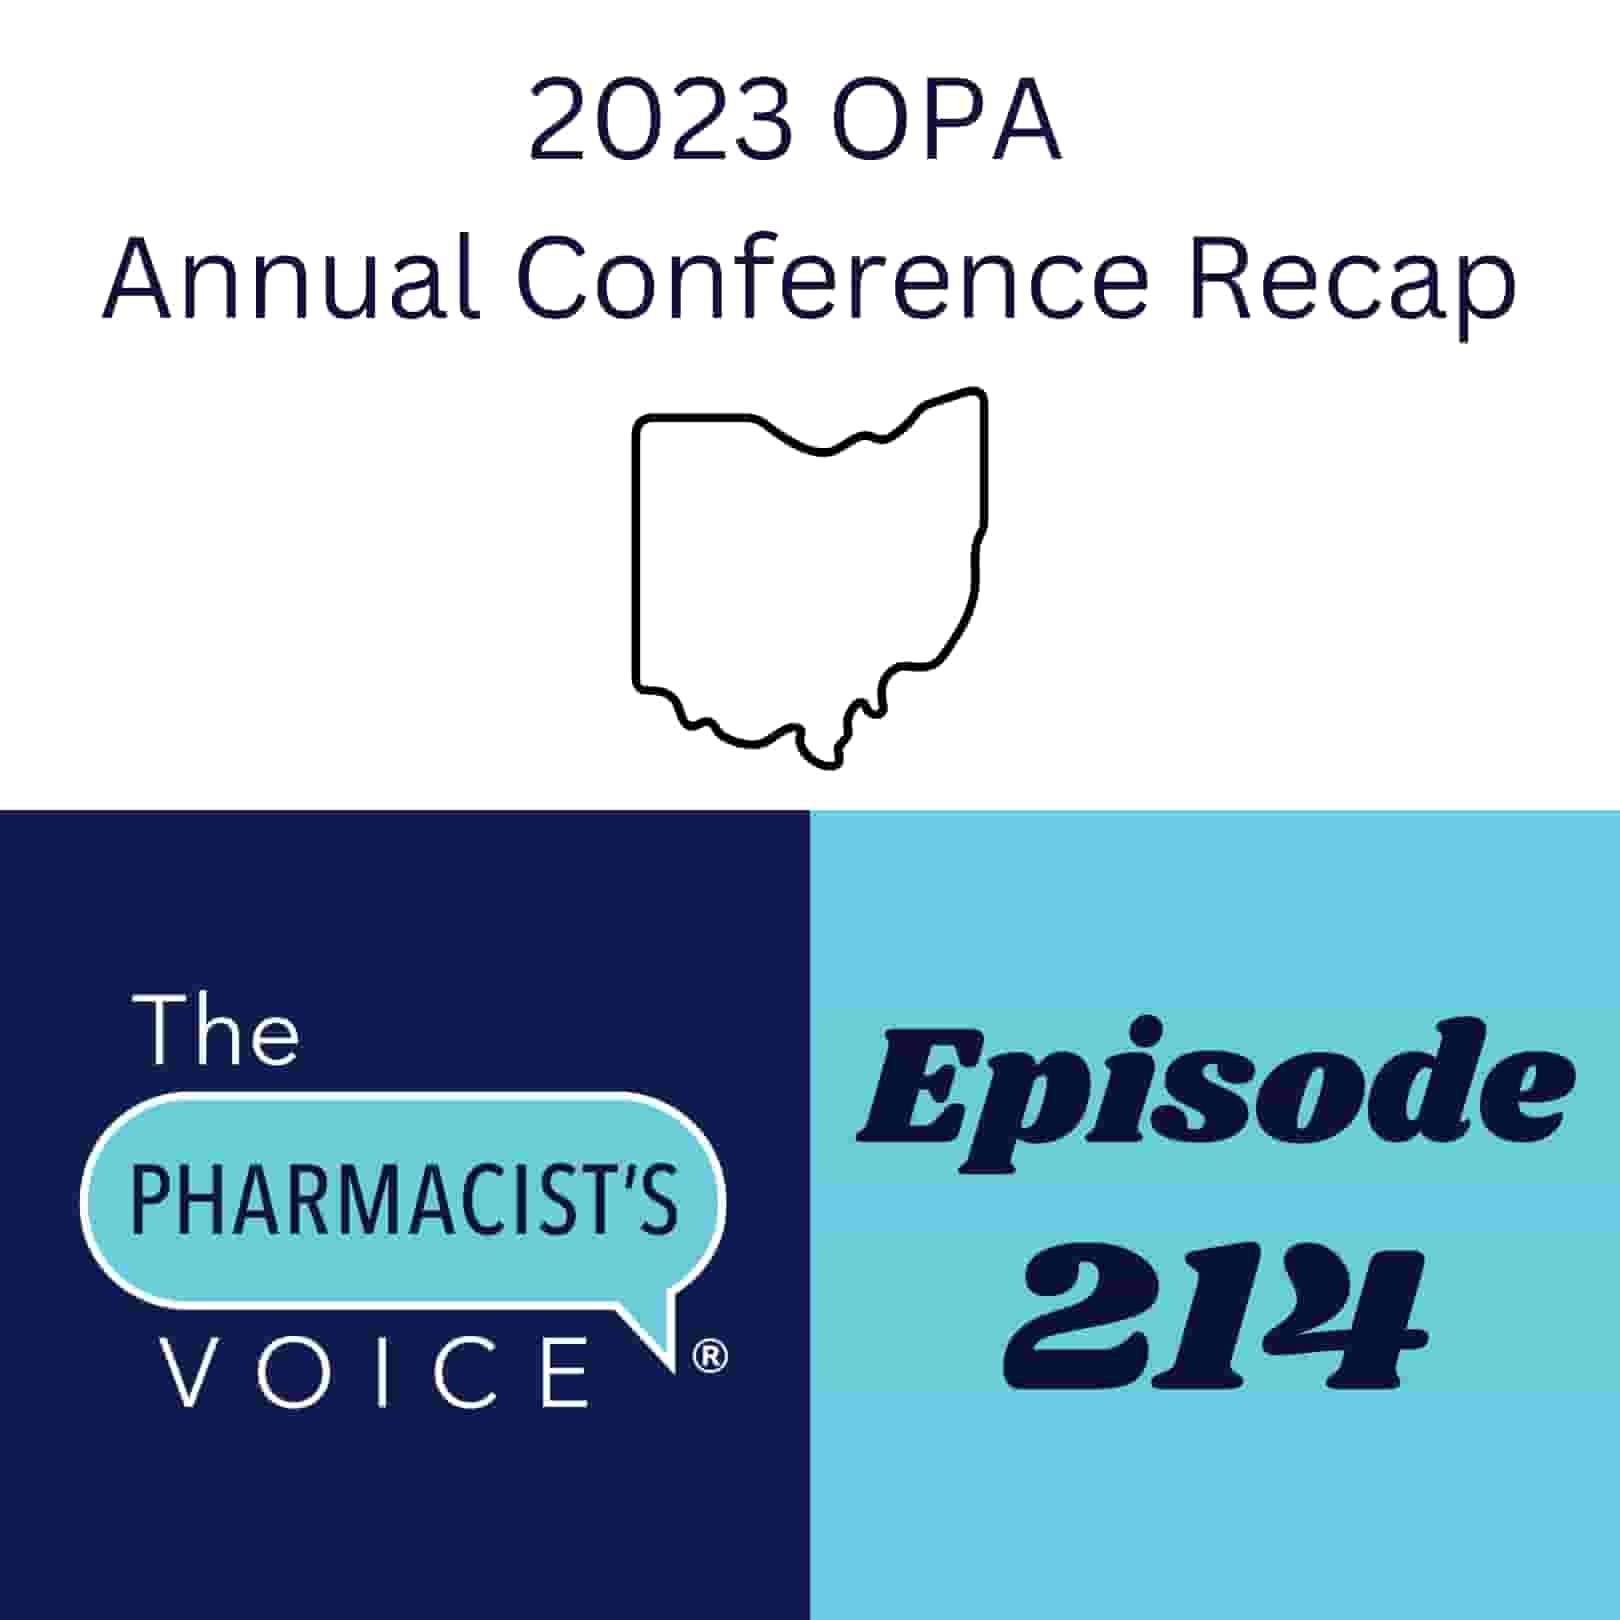 This is episode artwork for The Pharmacist's Voice Podcast episode 214. It features the talk bubble logo for The Pharmacist's Voice Podcast. The colors are light blue, navy blue, and white.